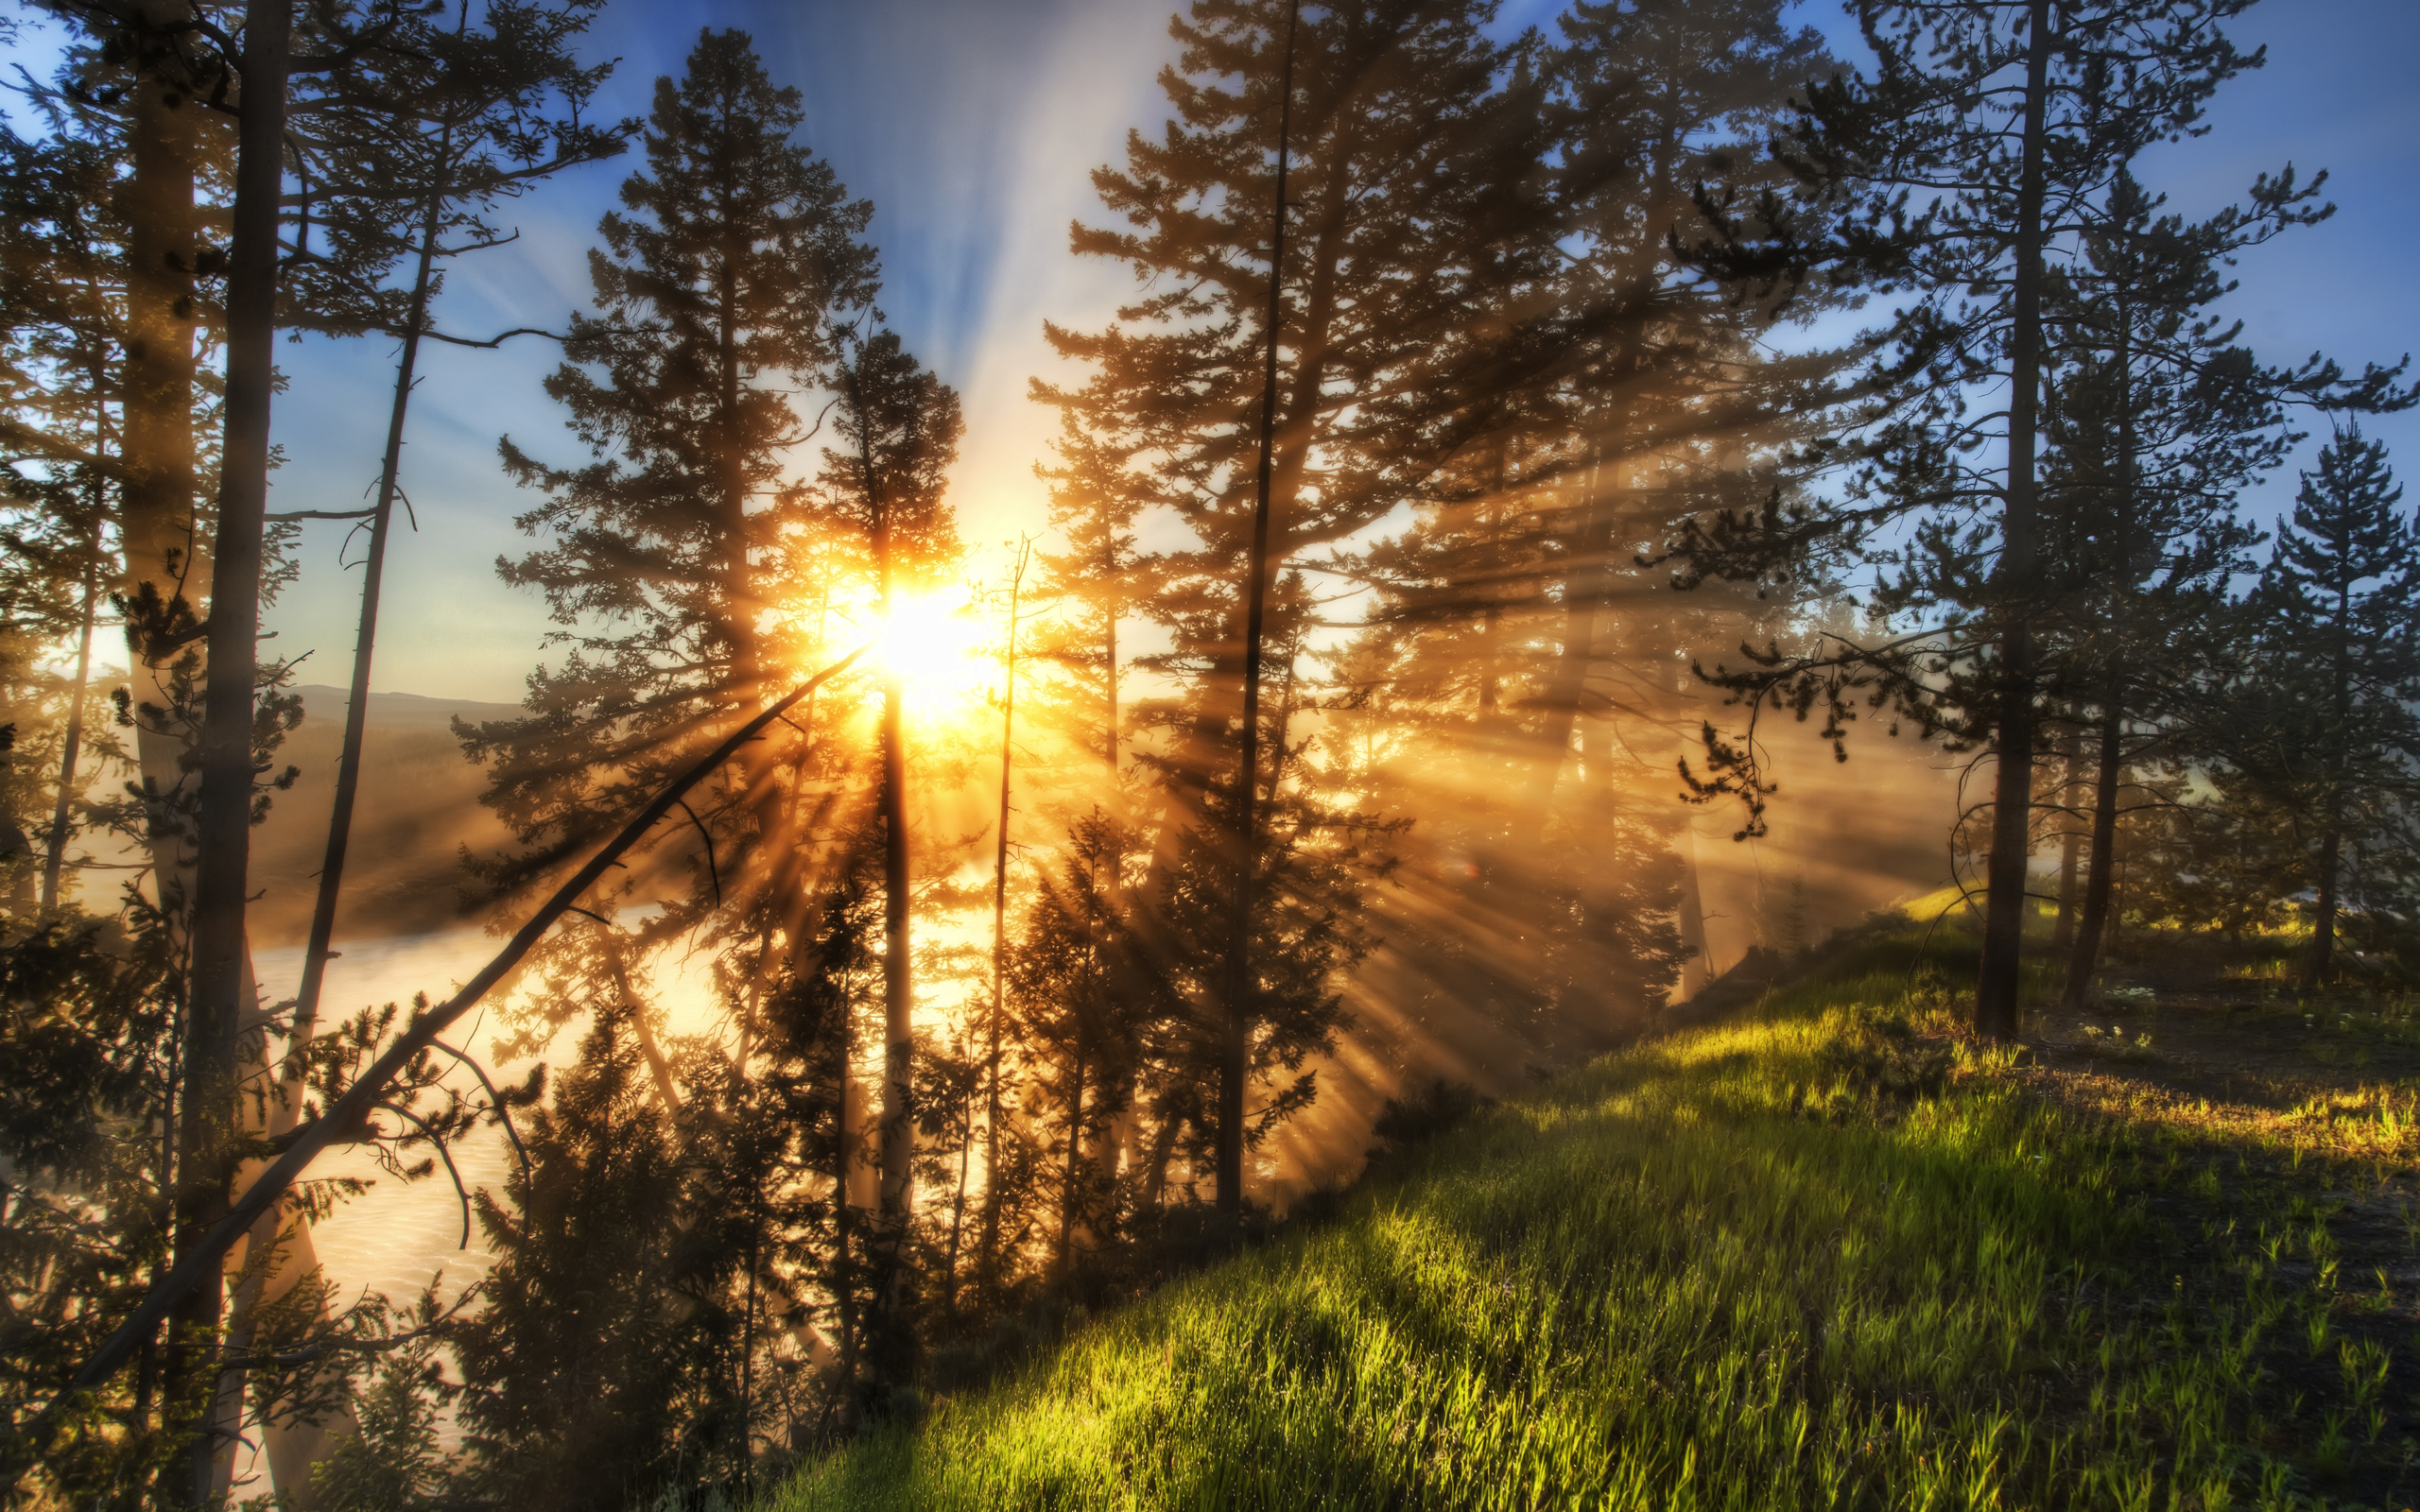 Widescreen Creative Yellowstone Pictures - Morning With Bright Sun - HD Wallpaper 